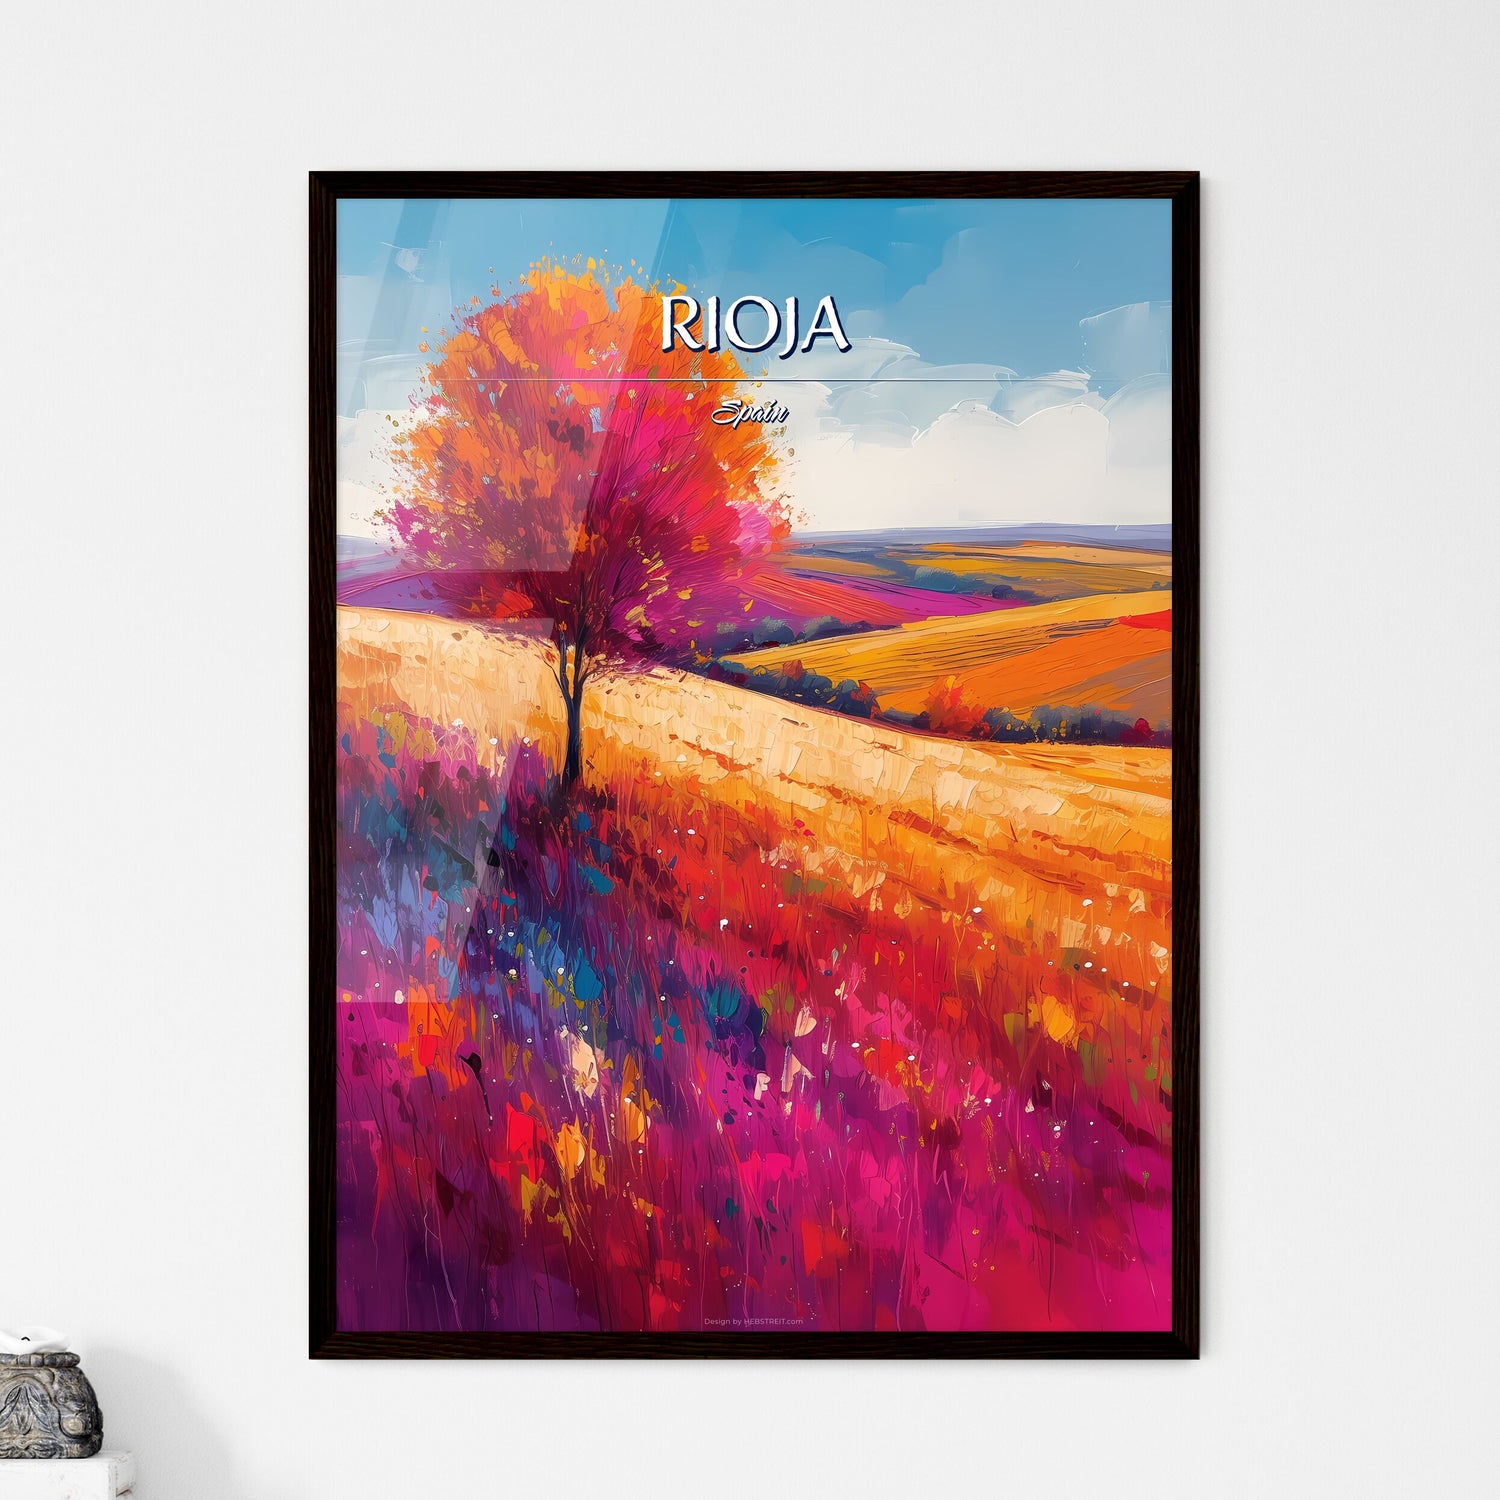 Rioja, Spain - Art print of a painting of a tree in a field of flowers Default Title